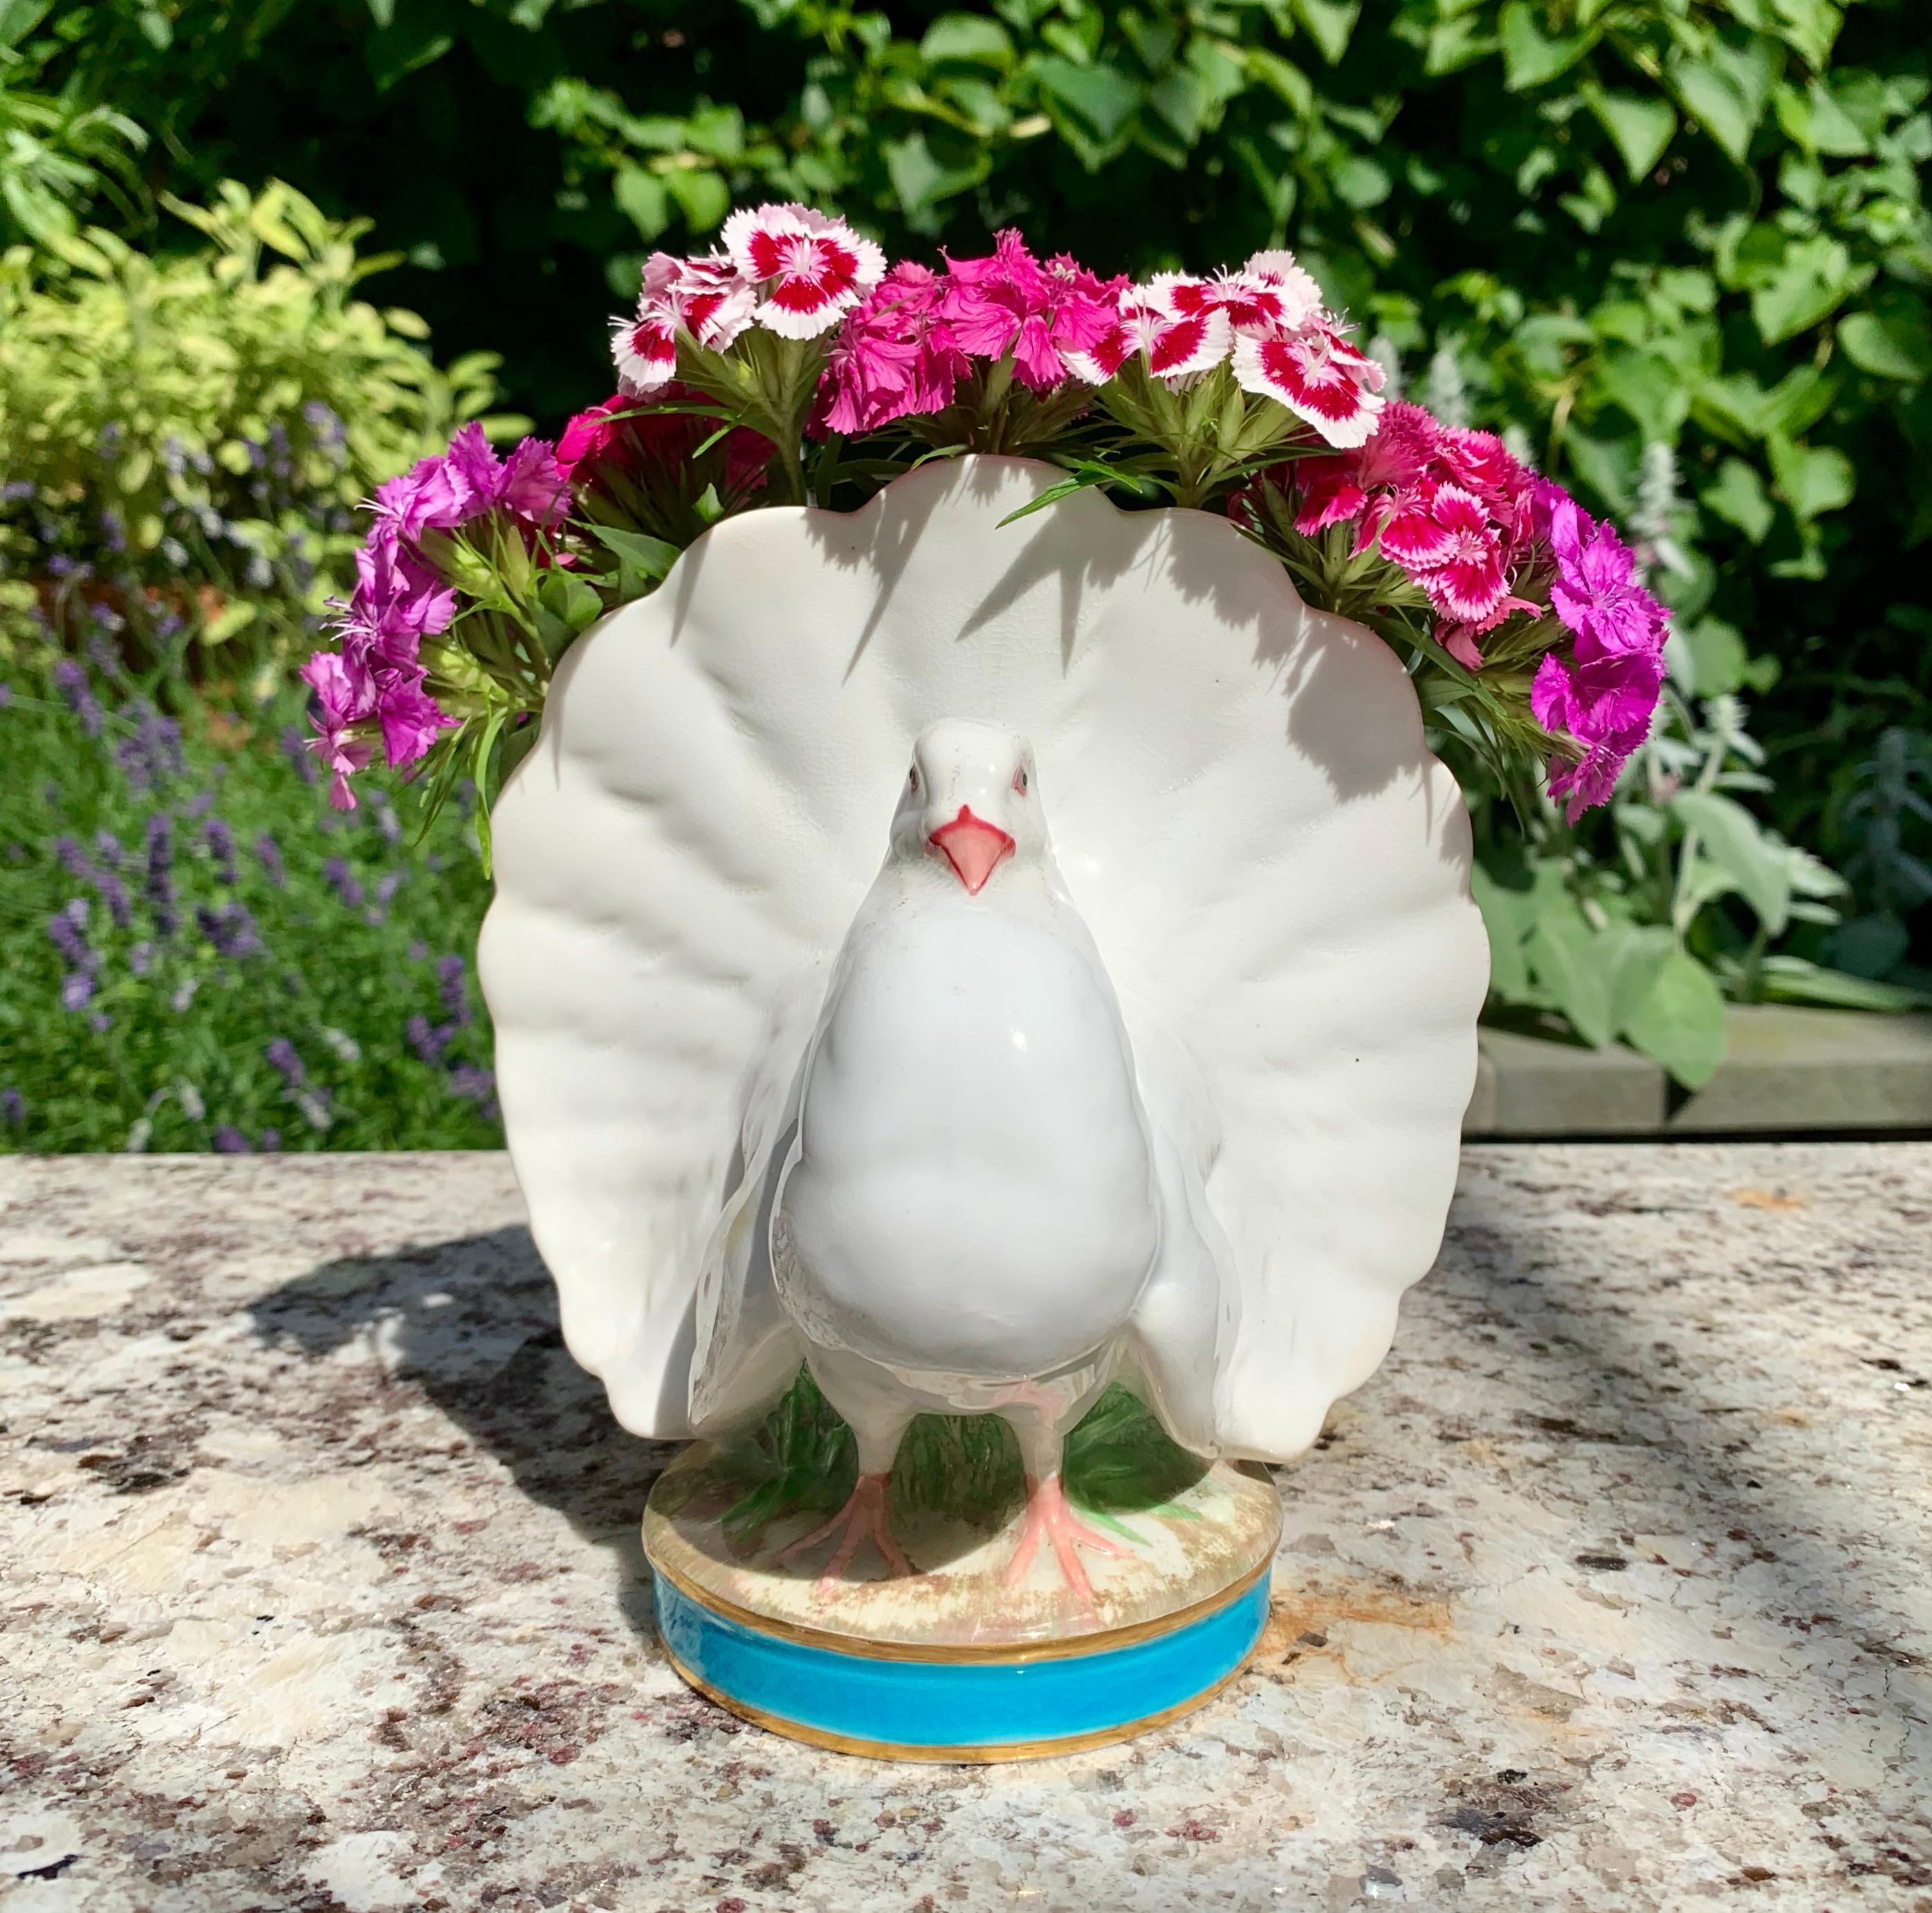 From Minton, Stoke-on-Trent, England, a porcelaneous posy vase formed as a full tailed dove or pigeon, dated 1876.

In the Rococo Revival style, the white bird sits on a round grassy base banded in turquoise and gold. Her flared tail feathers